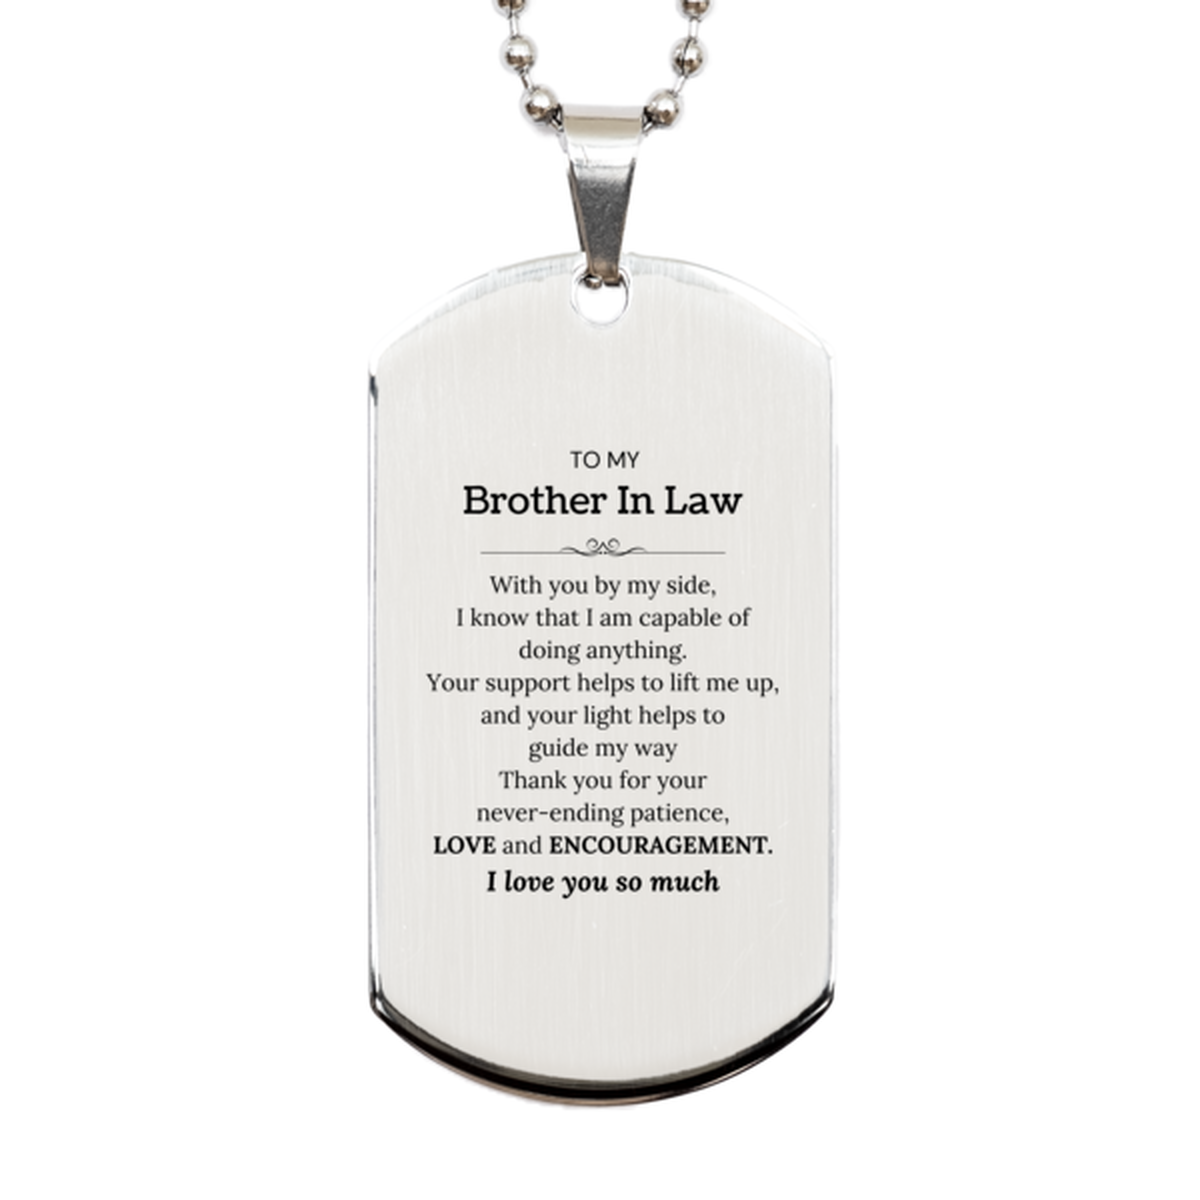 Appreciation Brother In Law Silver Dog Tag Gifts, To My Brother In Law Birthday Christmas Wedding Keepsake Gifts for Brother In Law With you by my side, I know that I am capable of doing anything. I love you so much